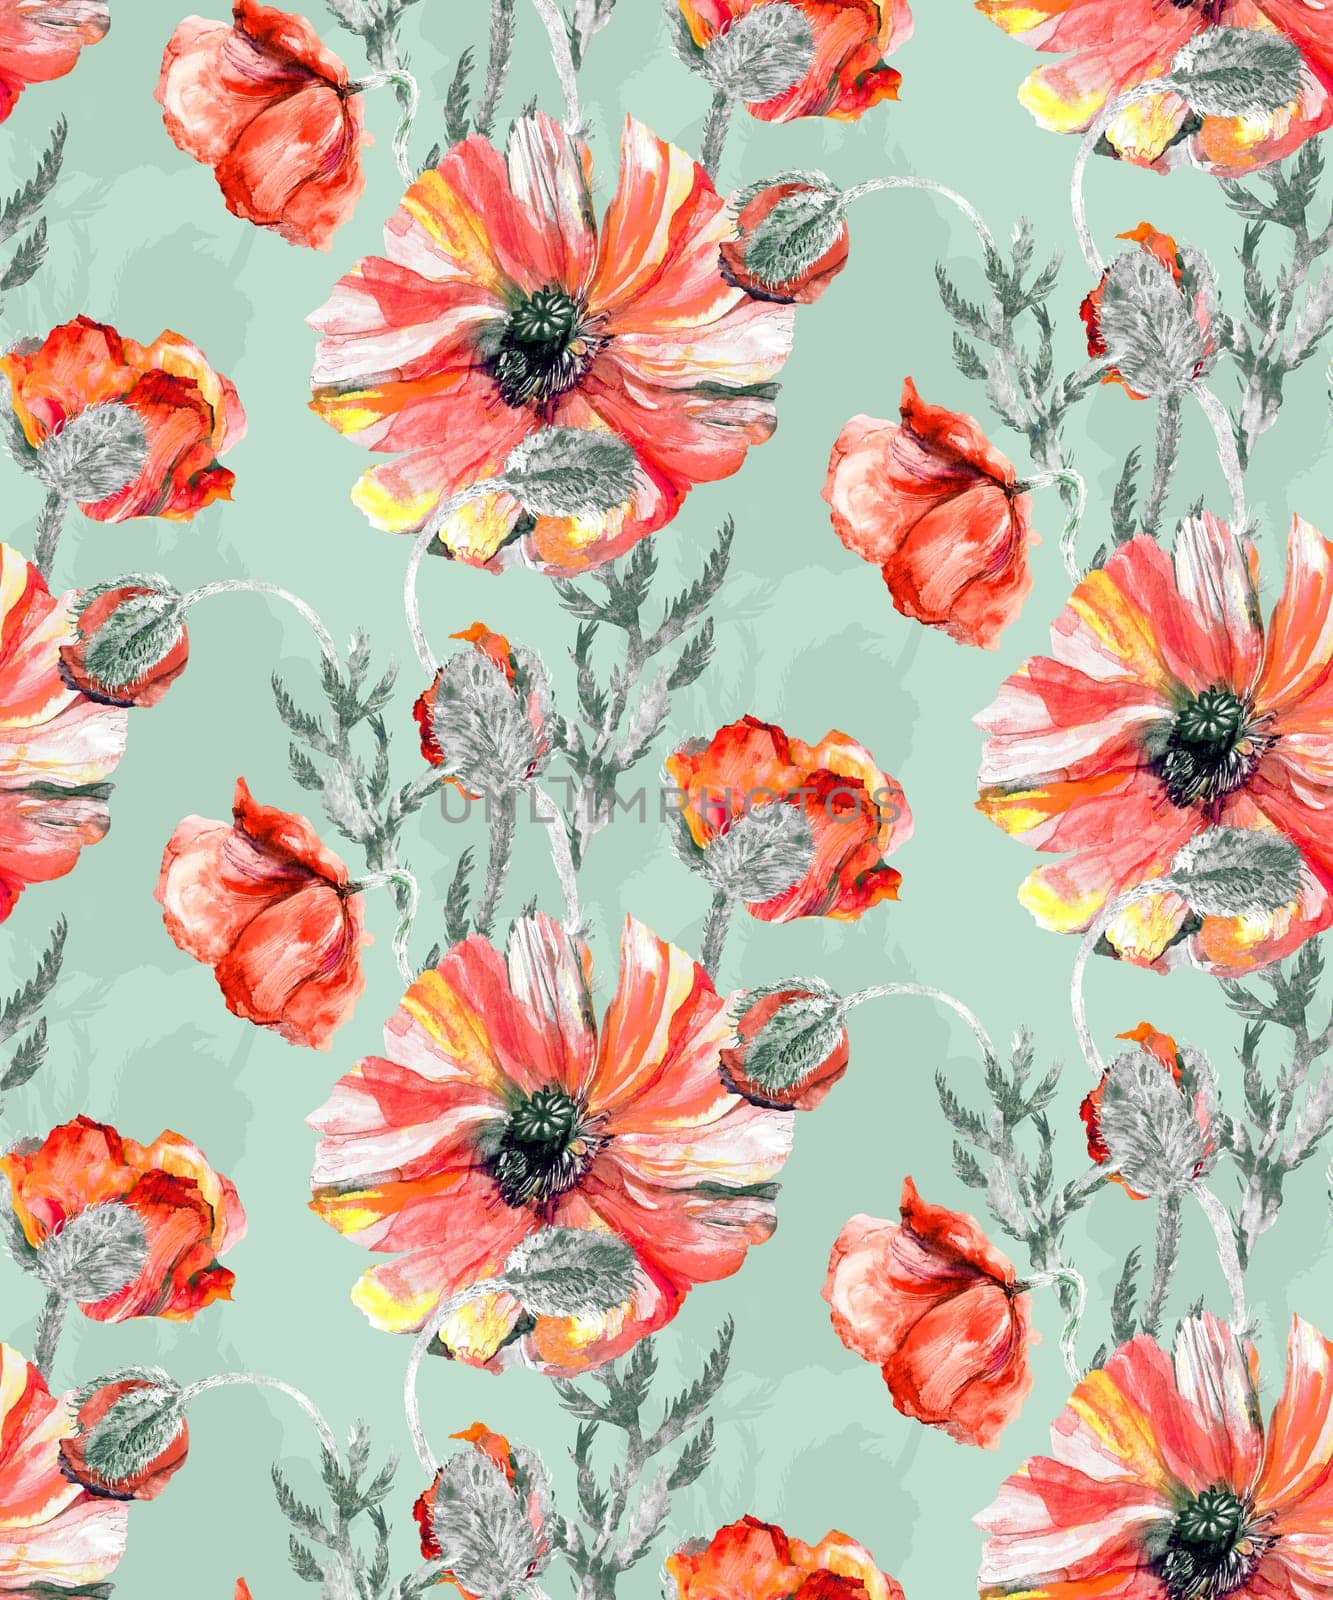 Seamless floral watercolor pattern with large realistic red poppies on a green background by MarinaVoyush